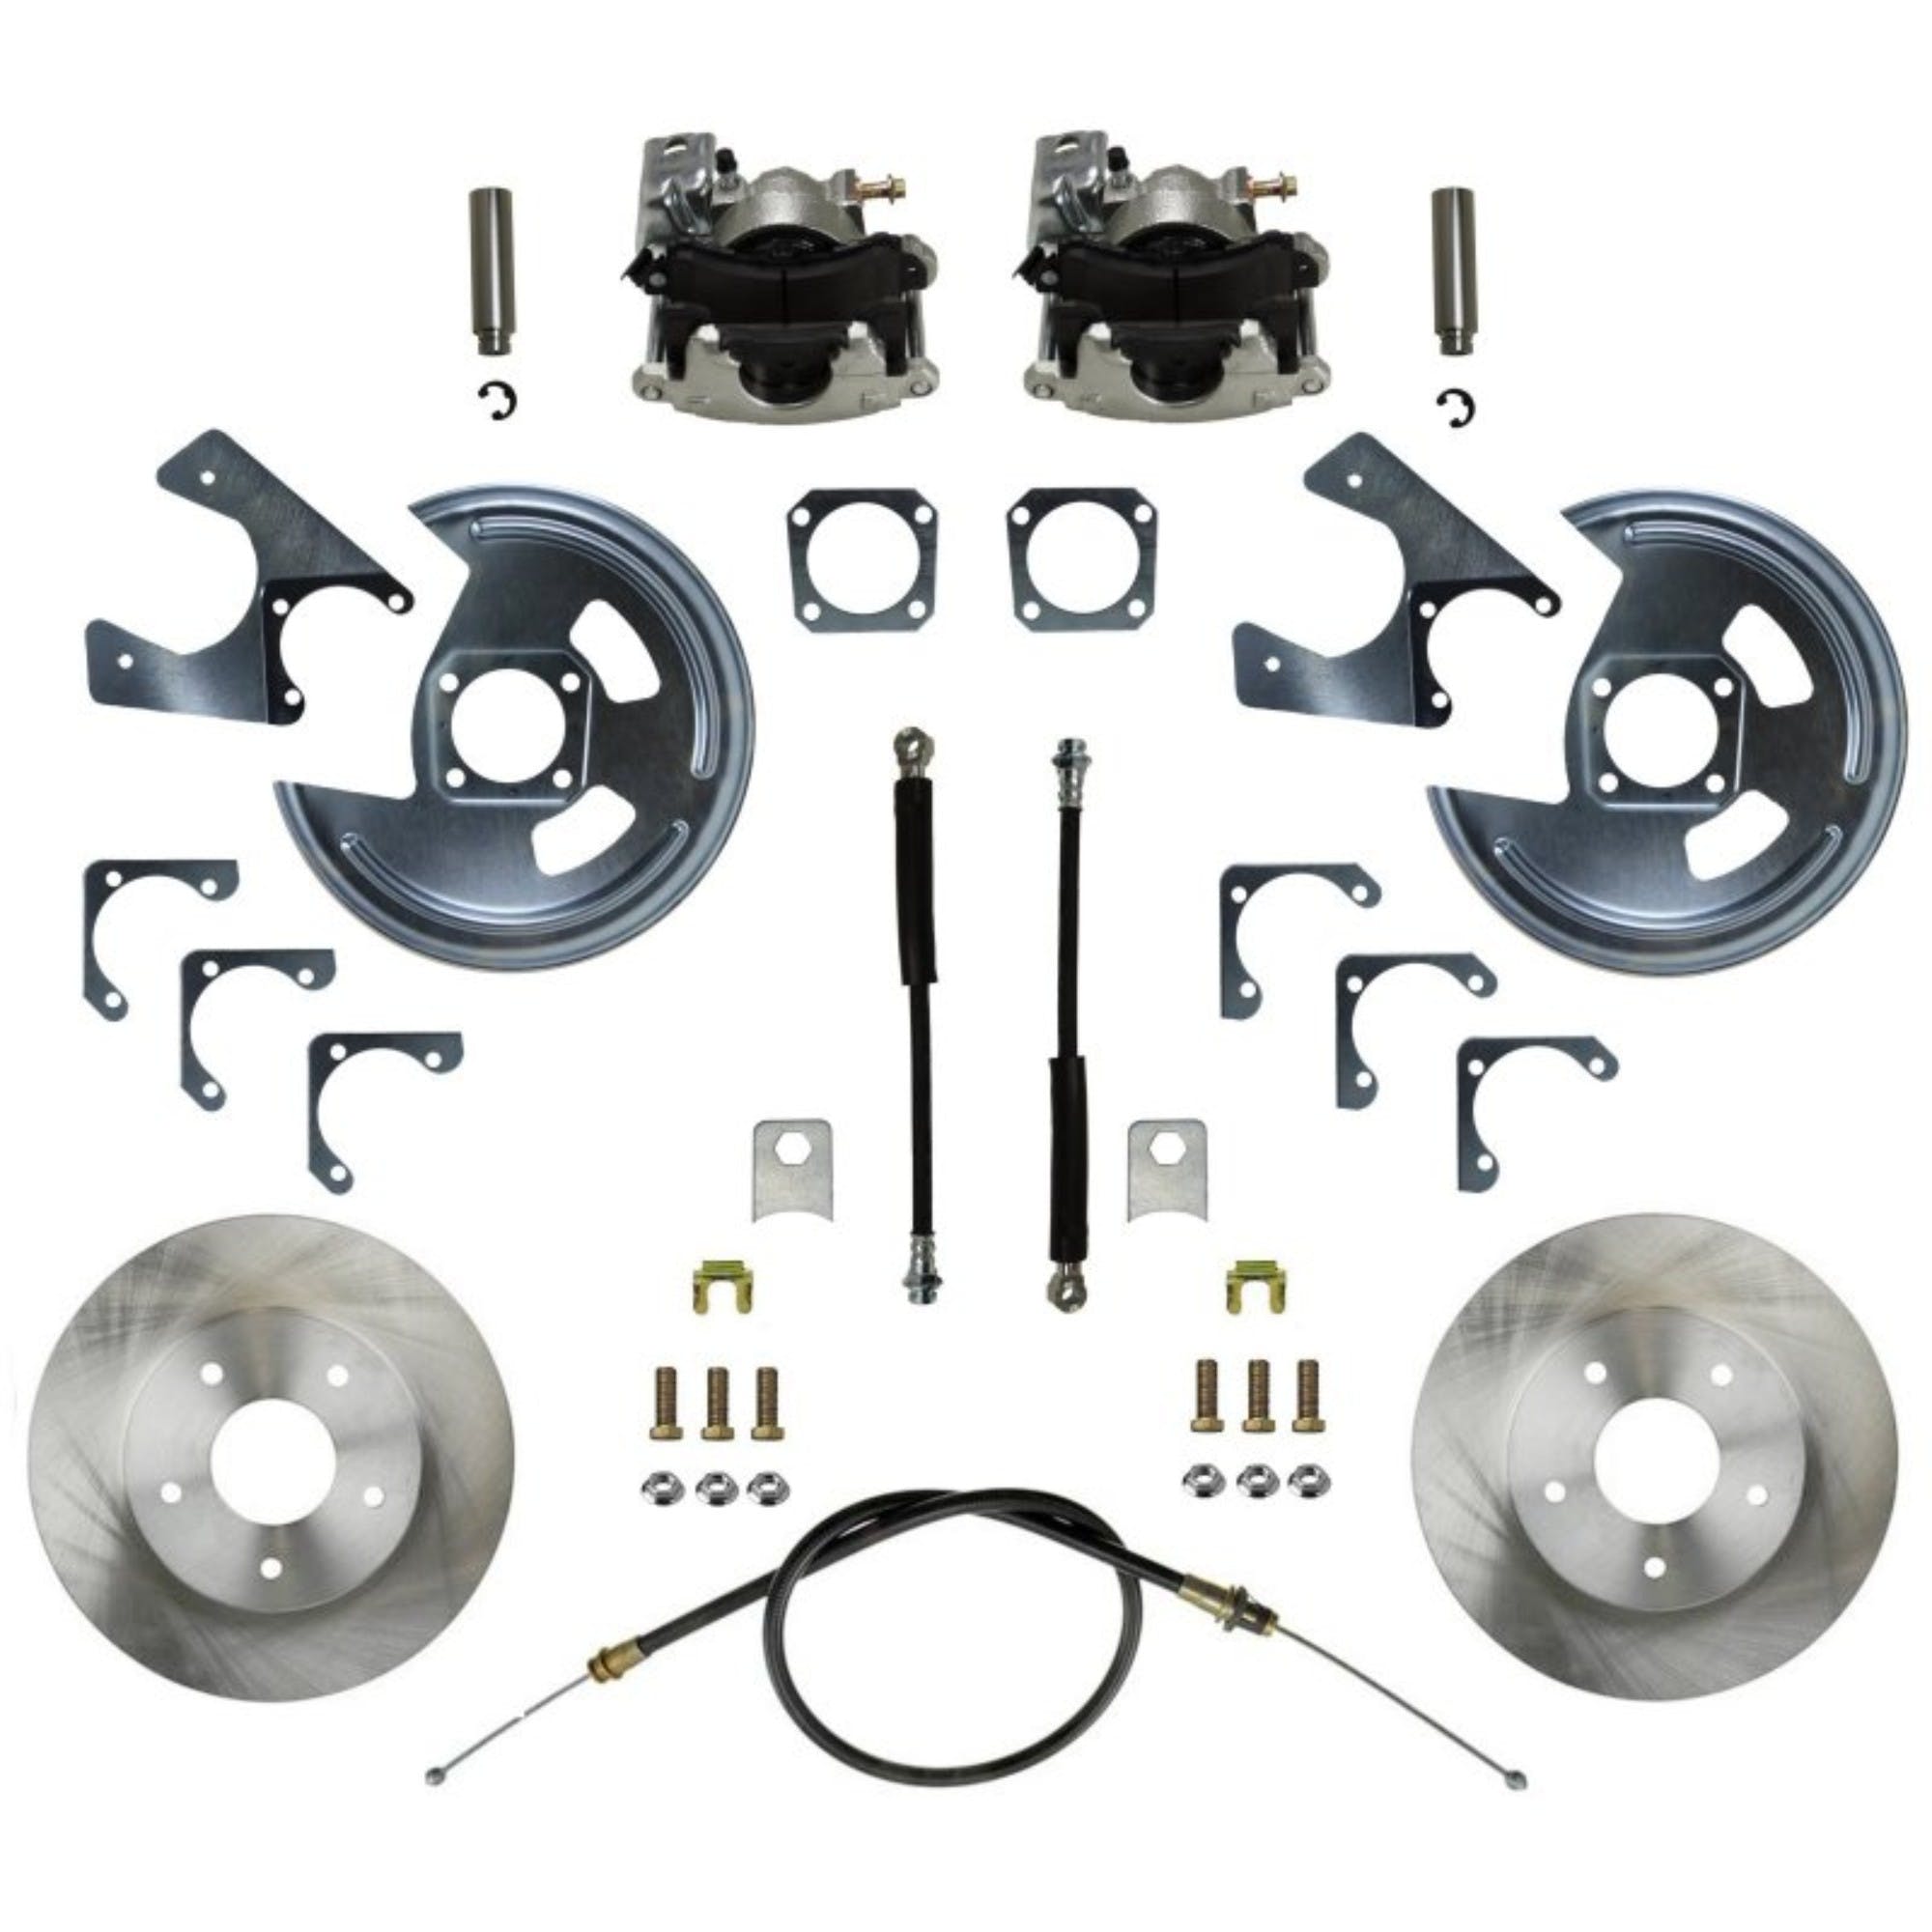 LEED Brakes RC1002 Rear Drum to Disc Brake Conversion Kit - 11 inch Rotor Staggered Shock